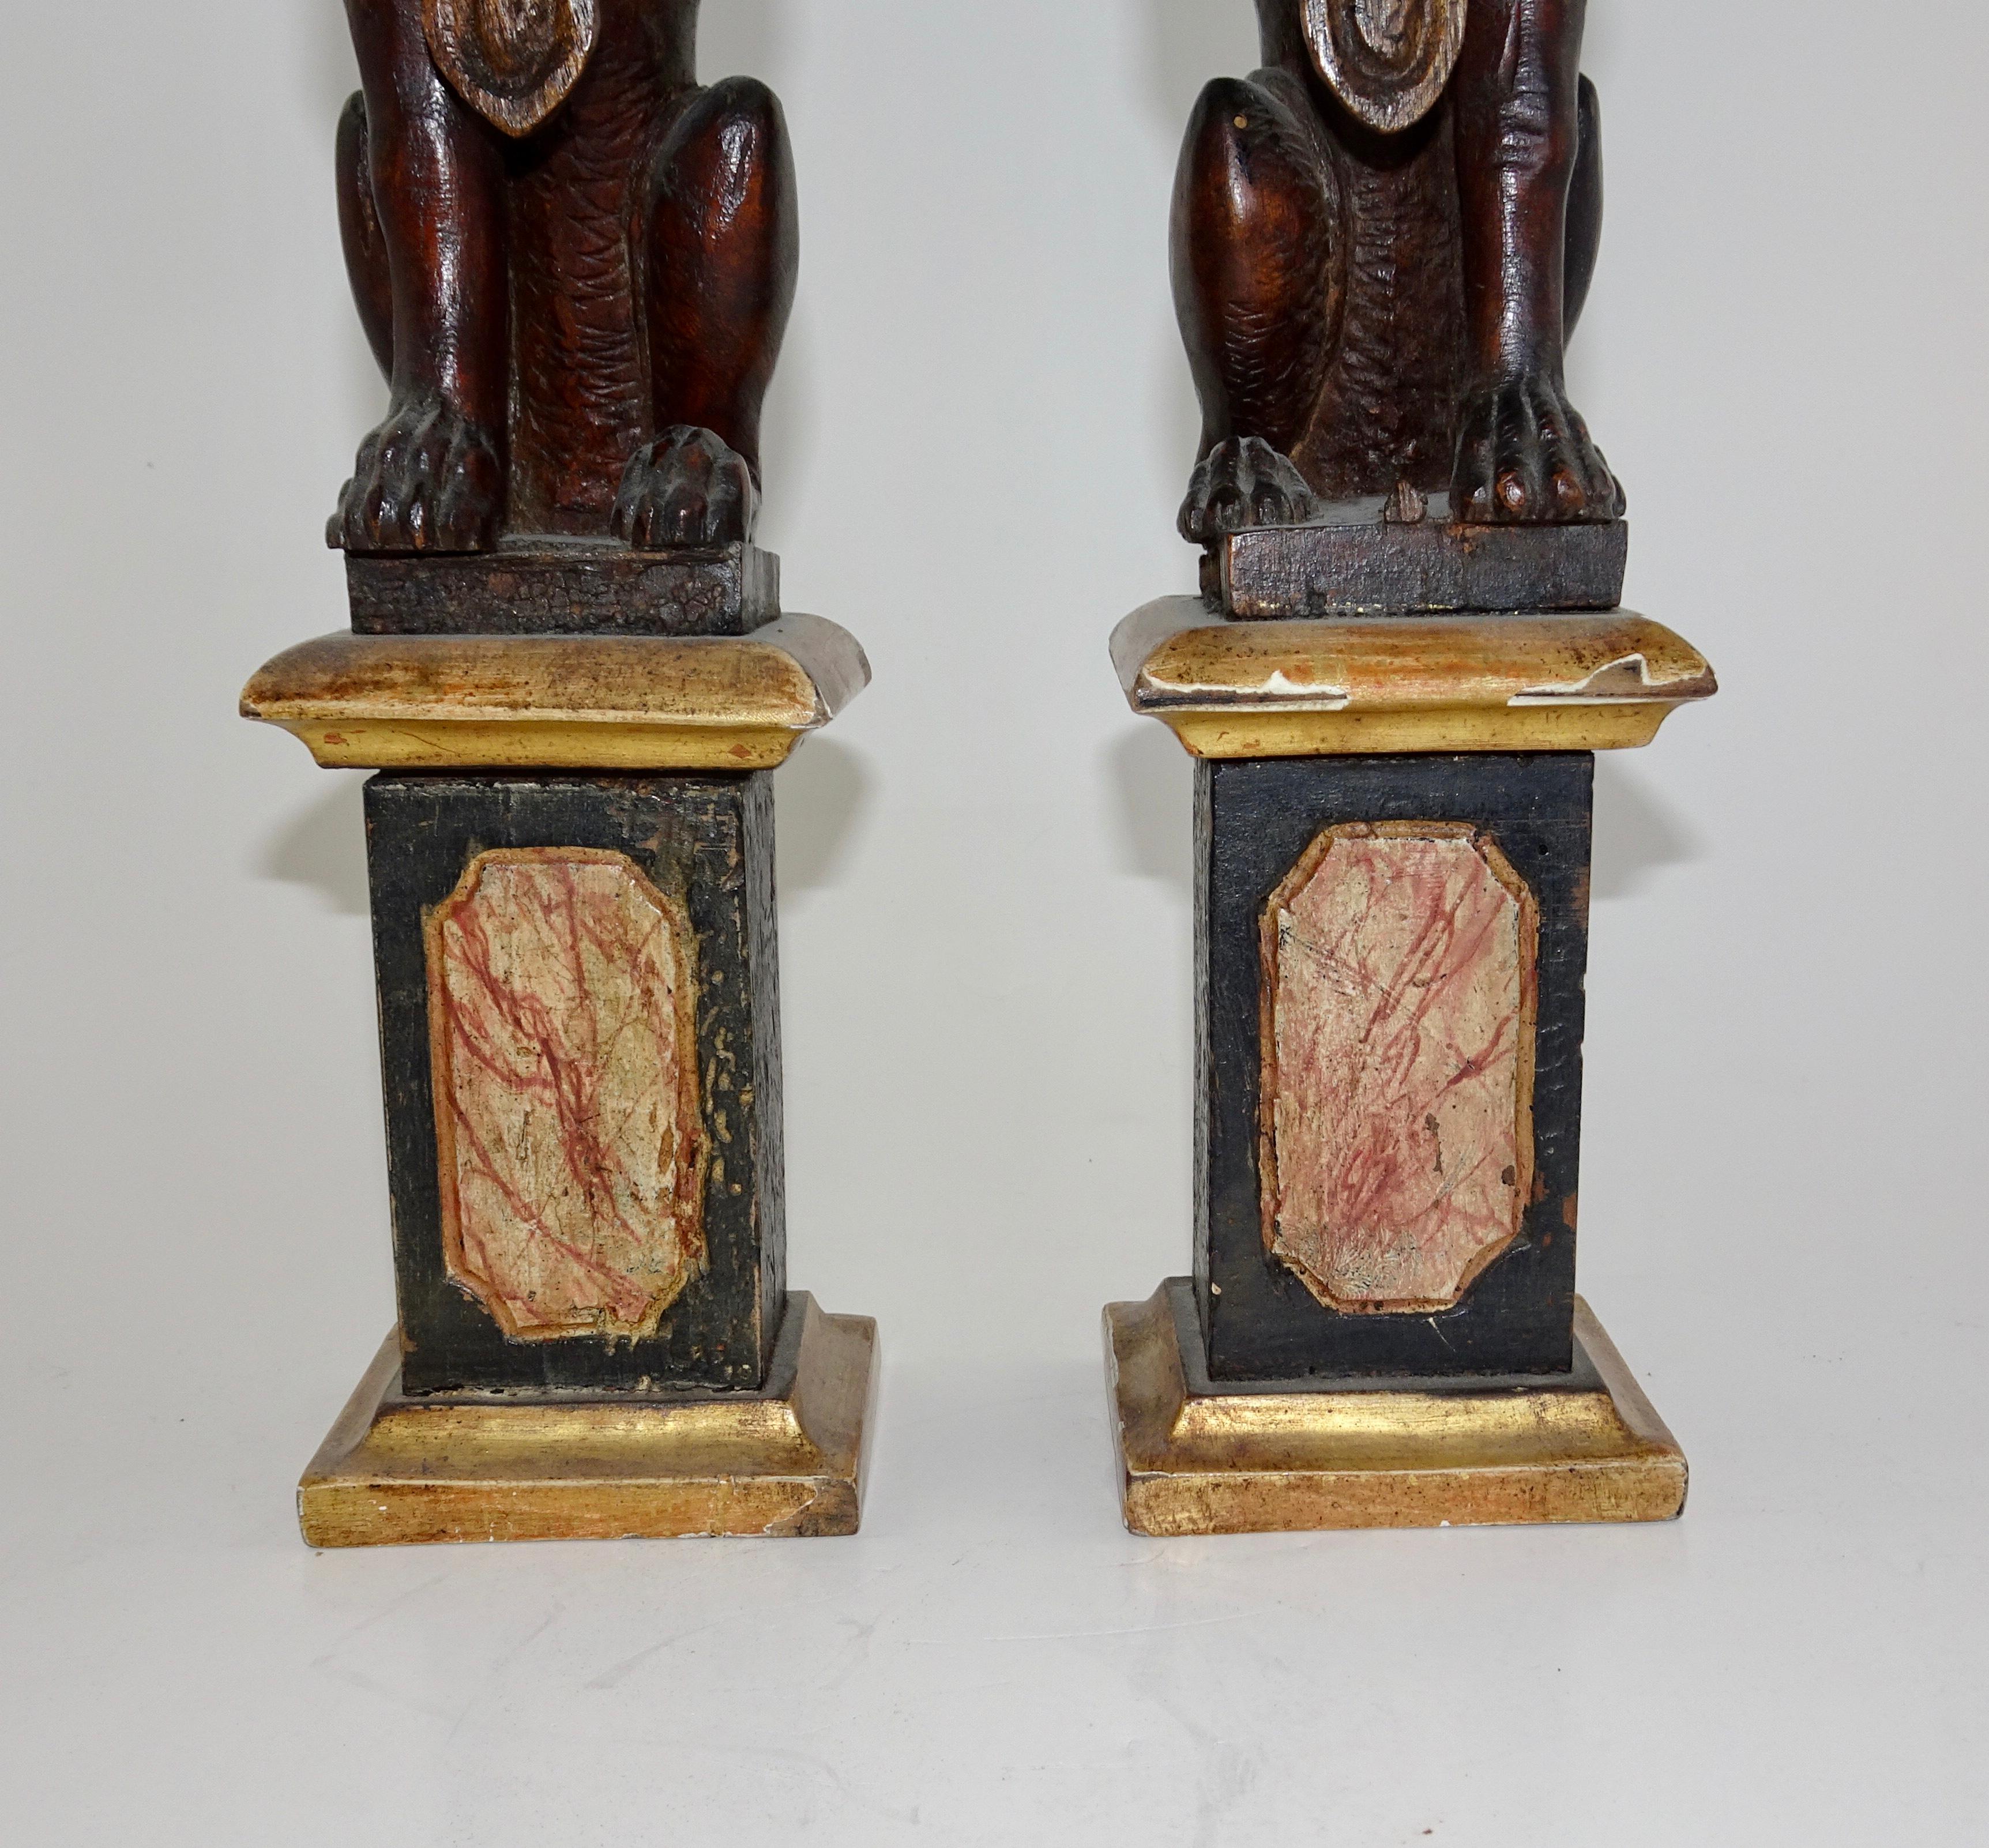 Italian Pair of 19th Century Wood Carved Lion Statues on Faux Marble Bases For Sale